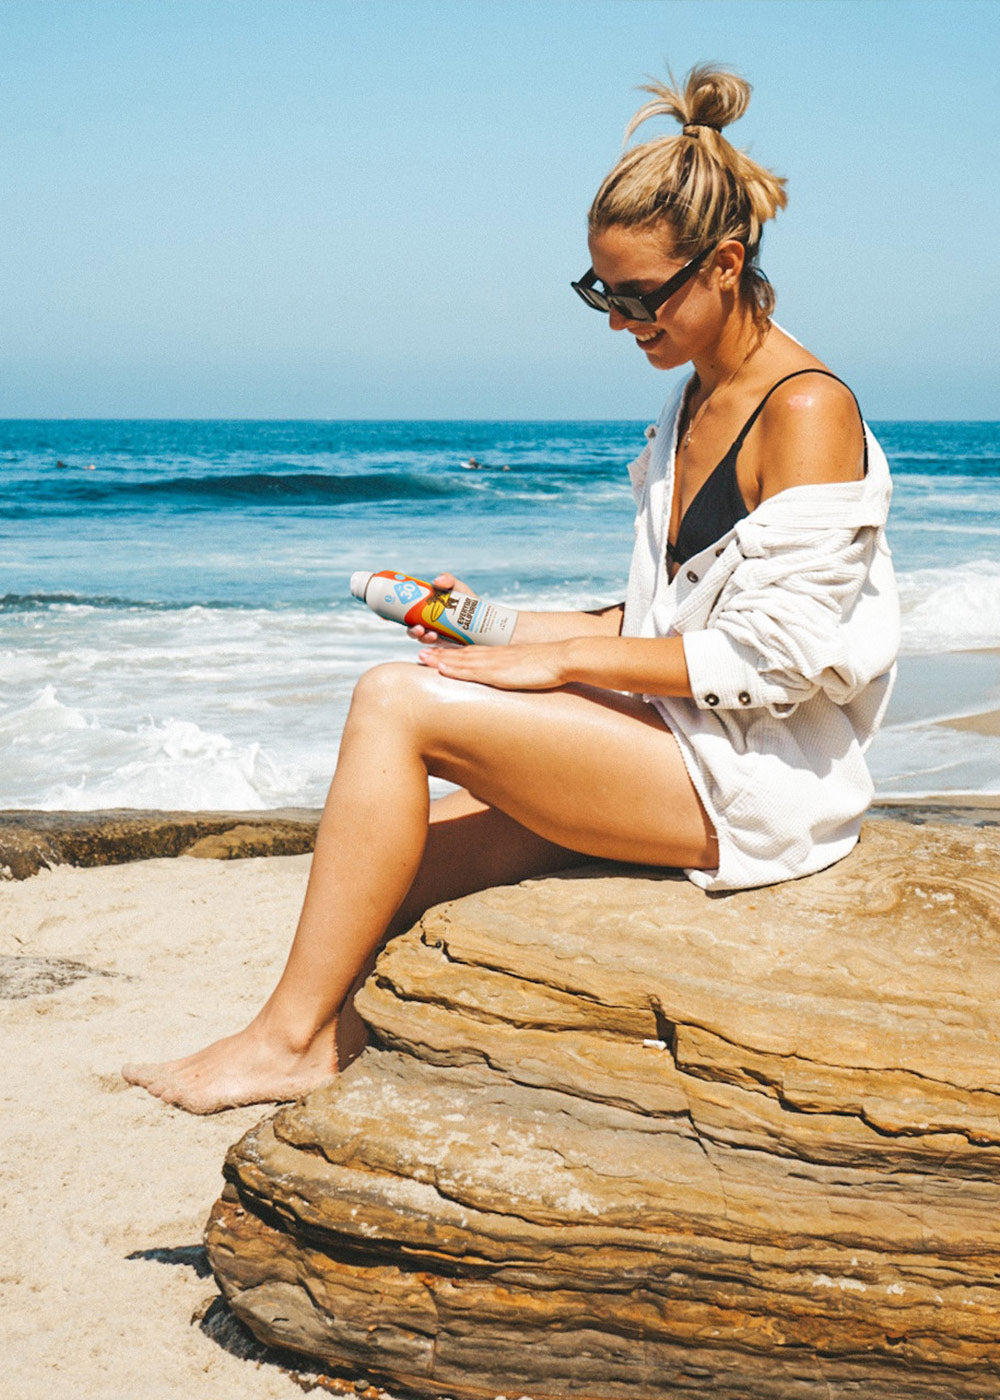 Photo of a girl sitting on a rock at the beach rubbing Everyday California Reef Safe Sunscreen into her skin.